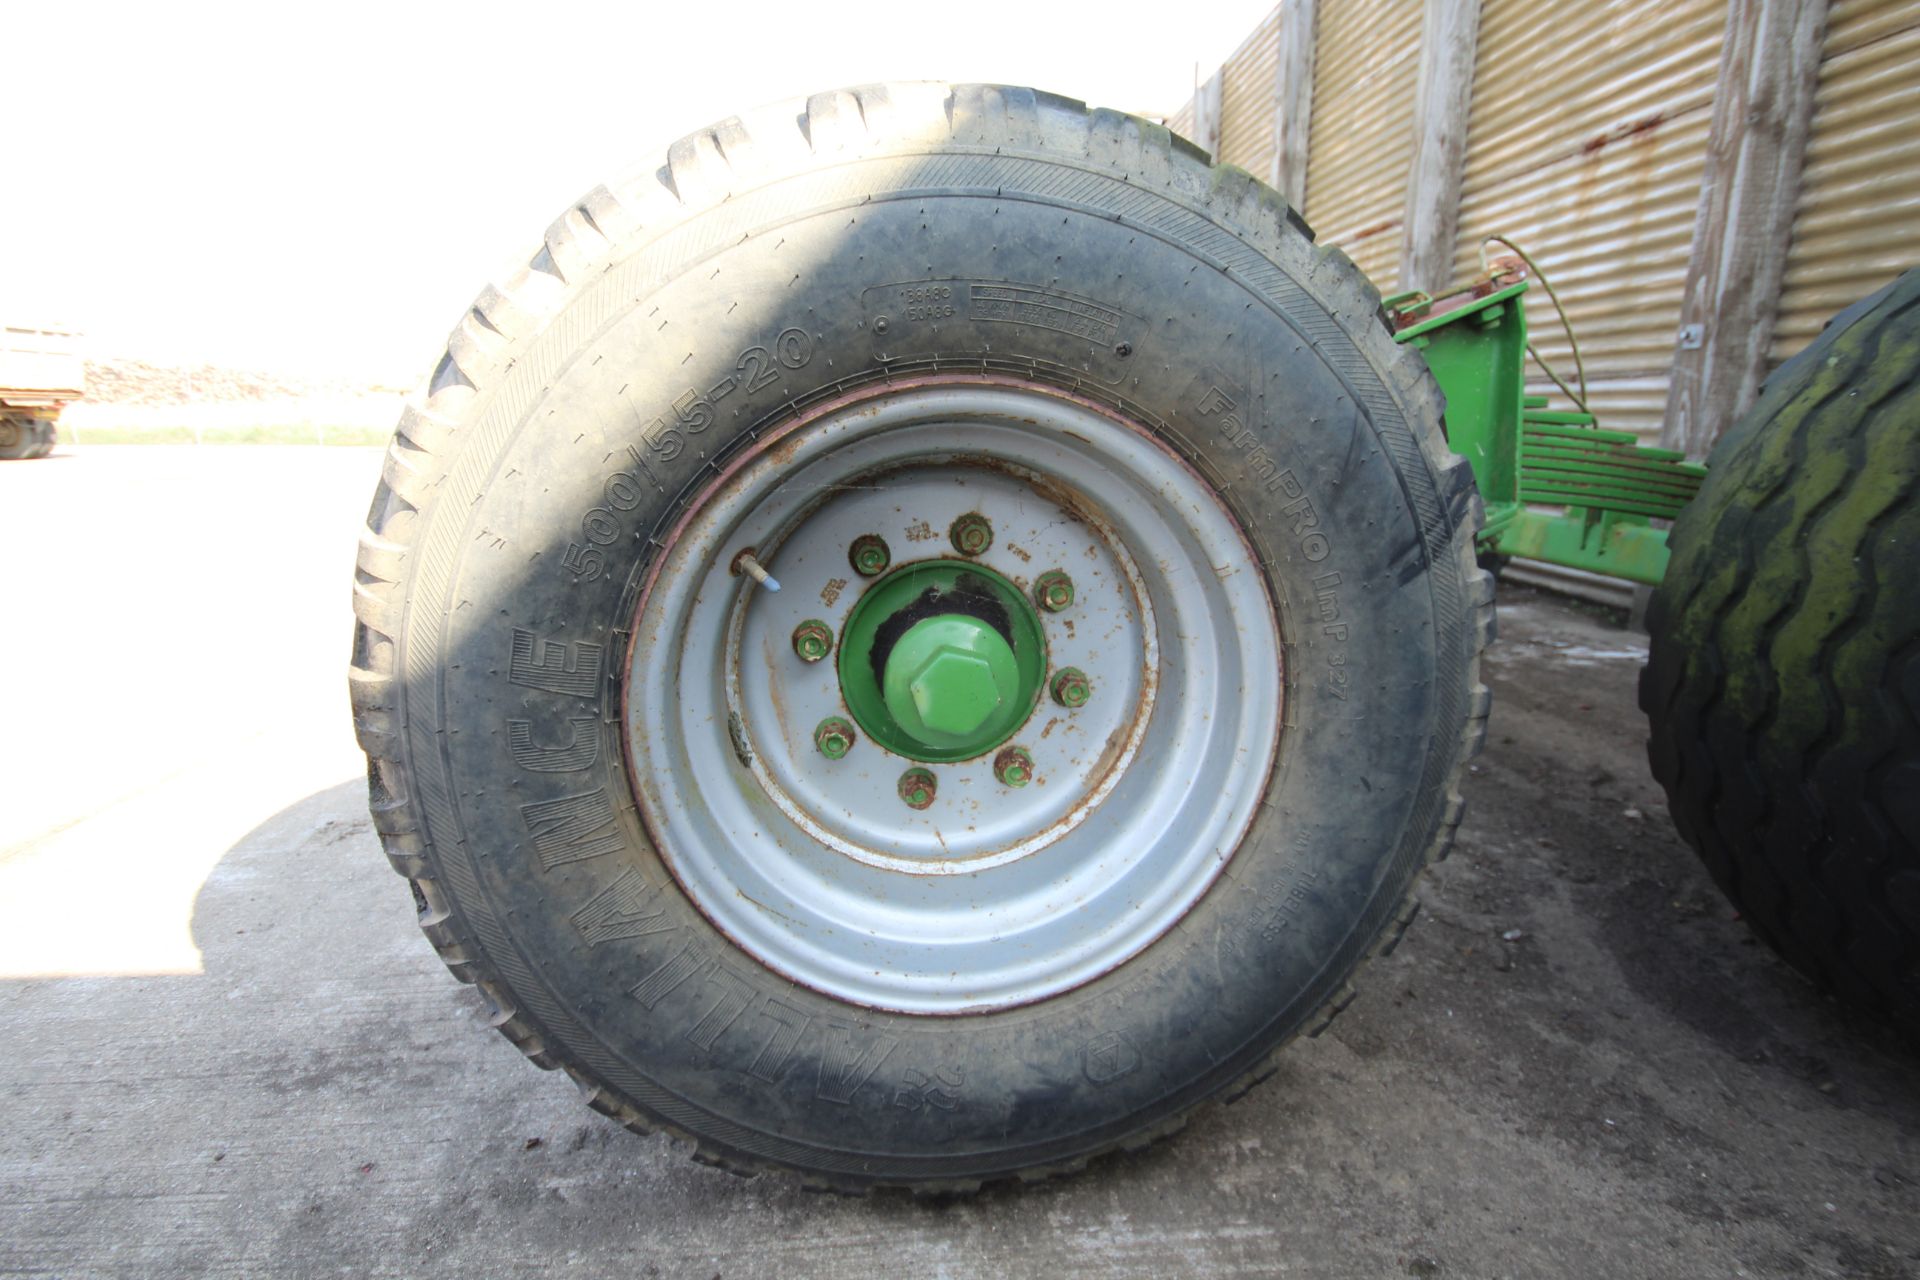 Twin axle agricultural trailer bogie. With floatation wheels and tyres. - Image 19 of 25